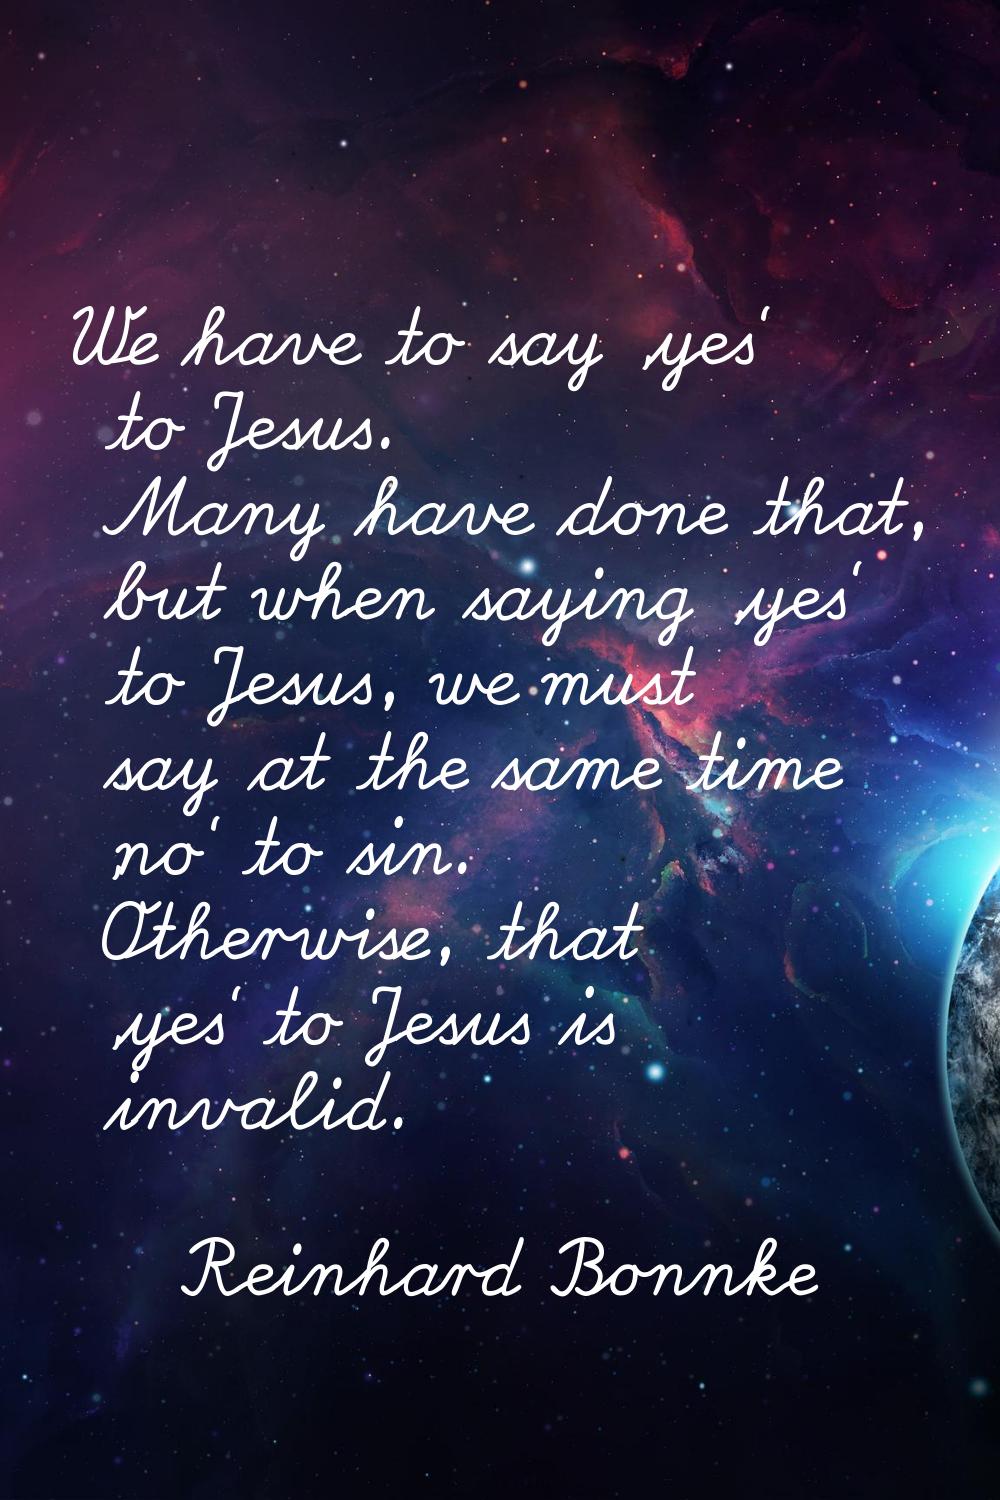 We have to say 'yes' to Jesus. Many have done that, but when saying 'yes' to Jesus, we must say at 